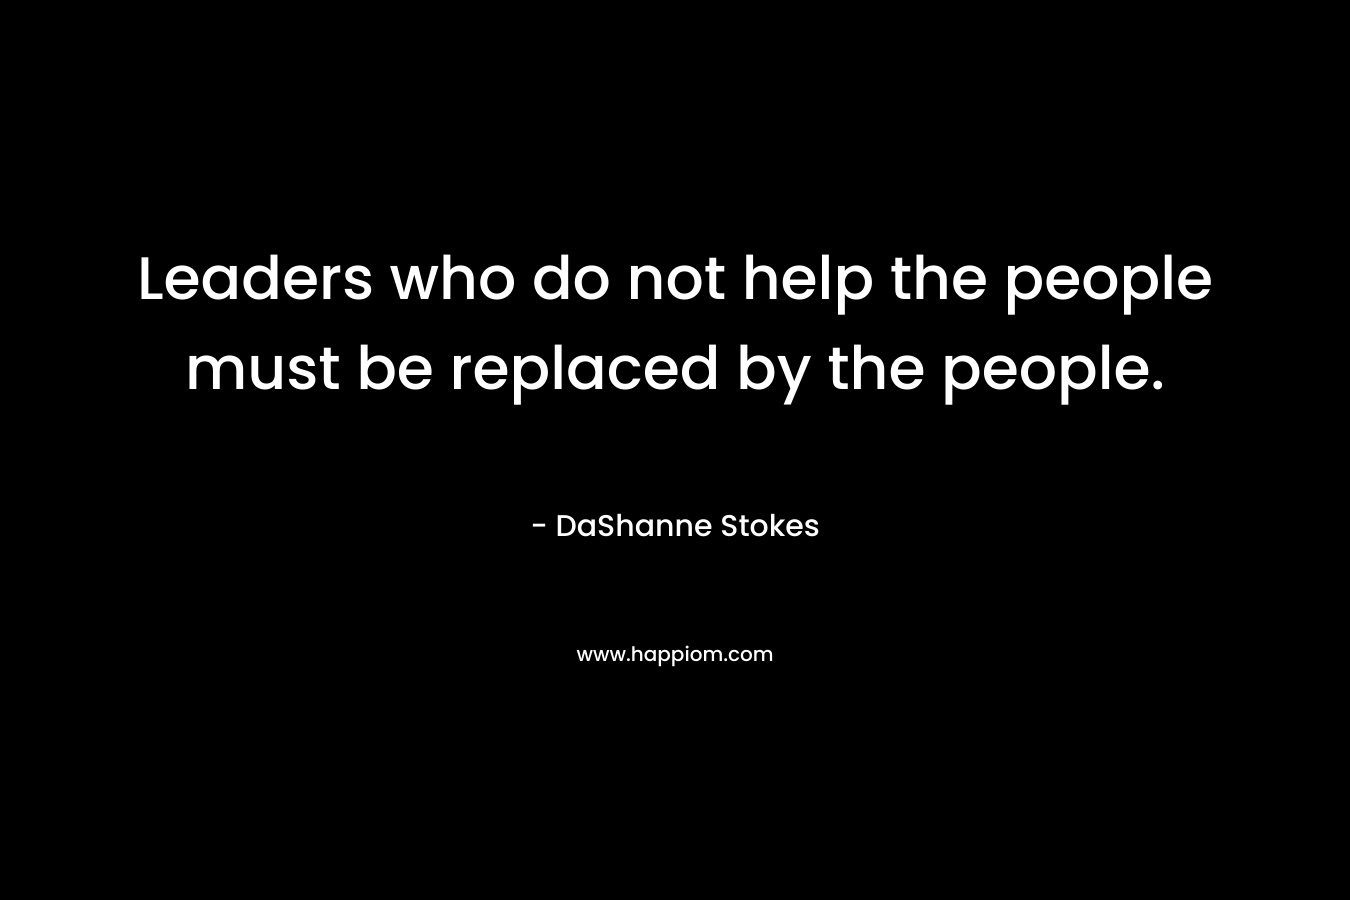 Leaders who do not help the people must be replaced by the people.